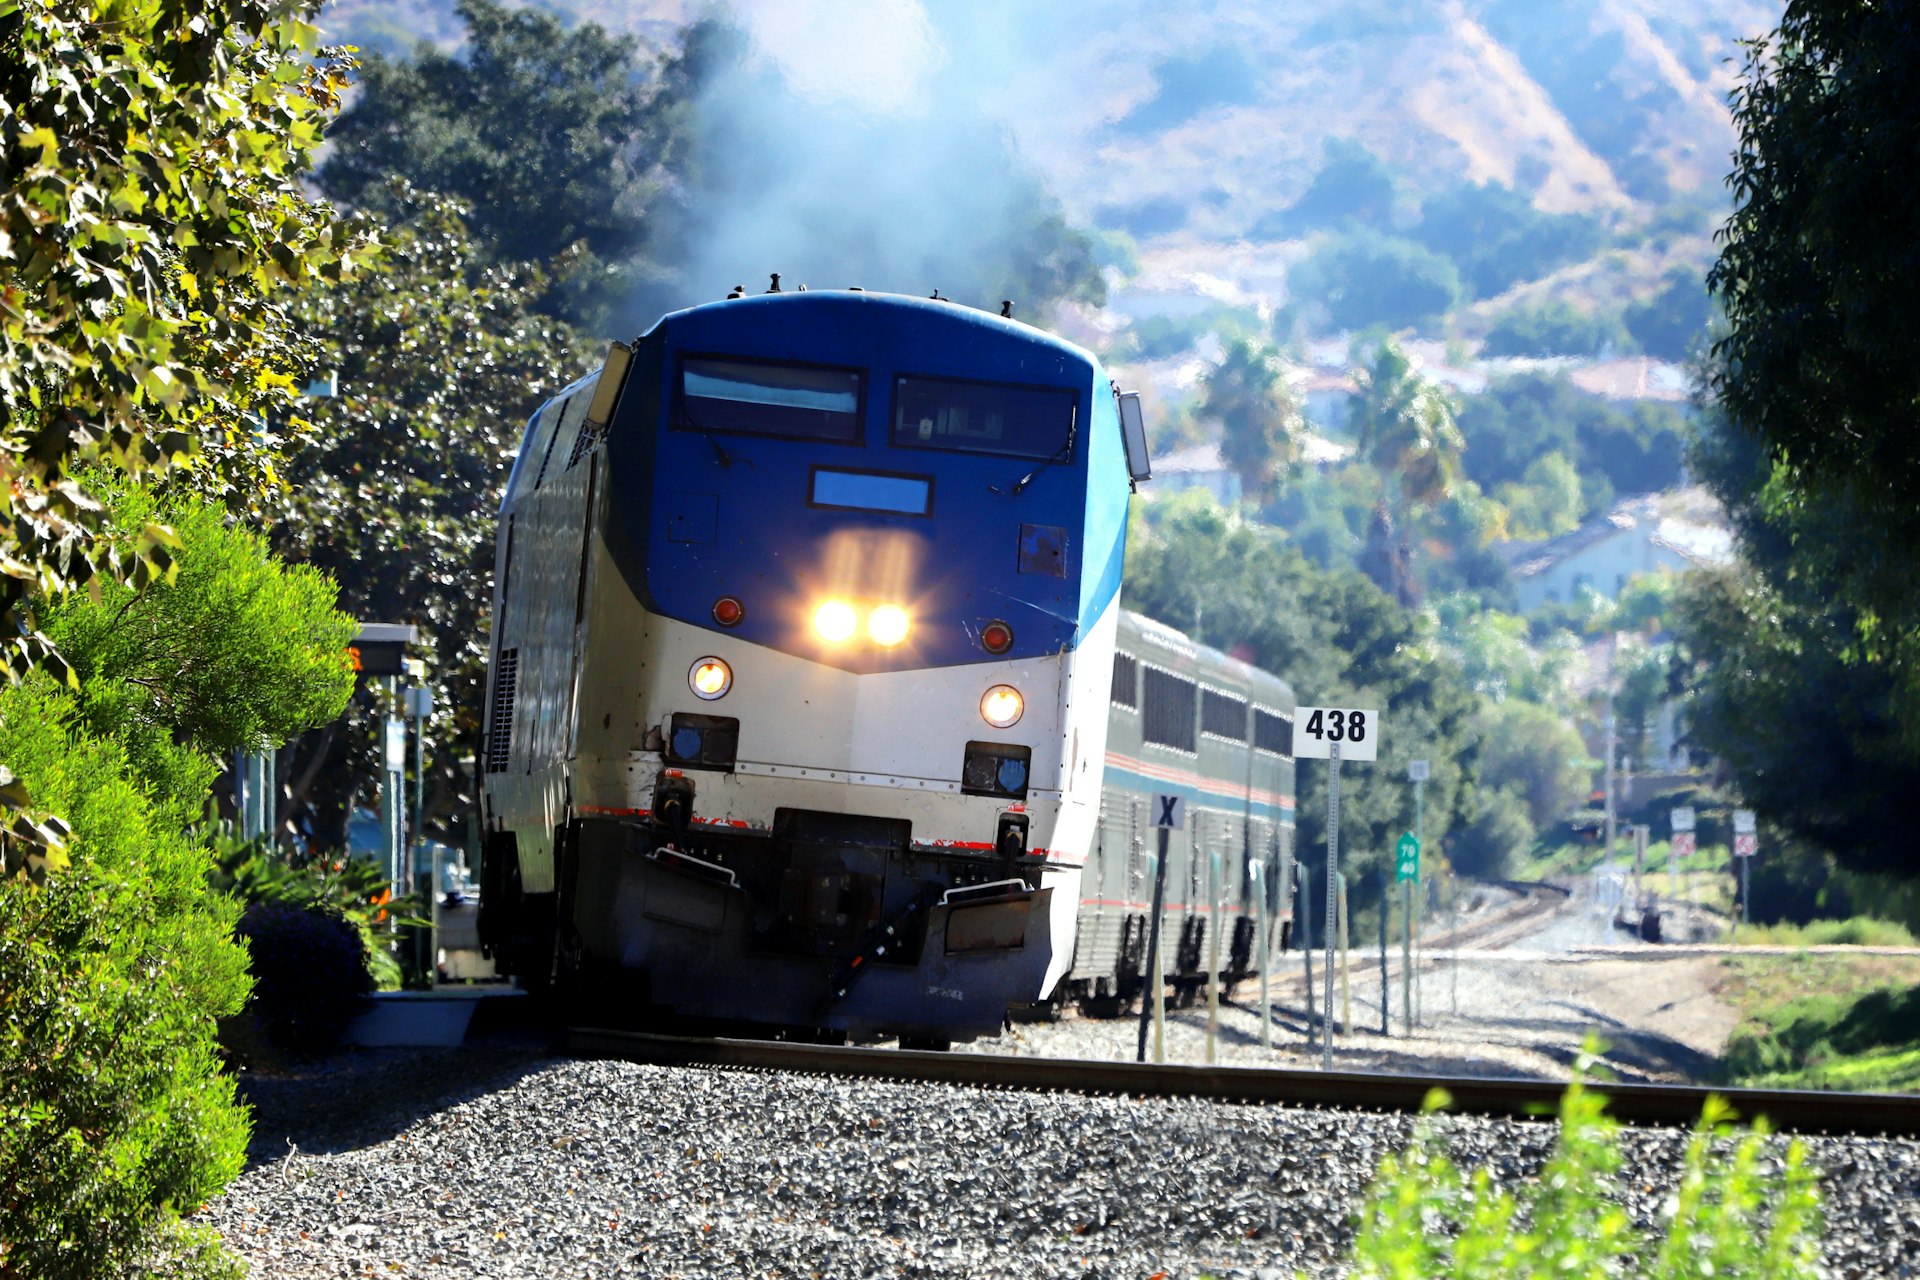 The Famous Long-Haul Amtrak Coast Starlight Train from Los Angeles to Seattle departs from Simi Valley Station, California.